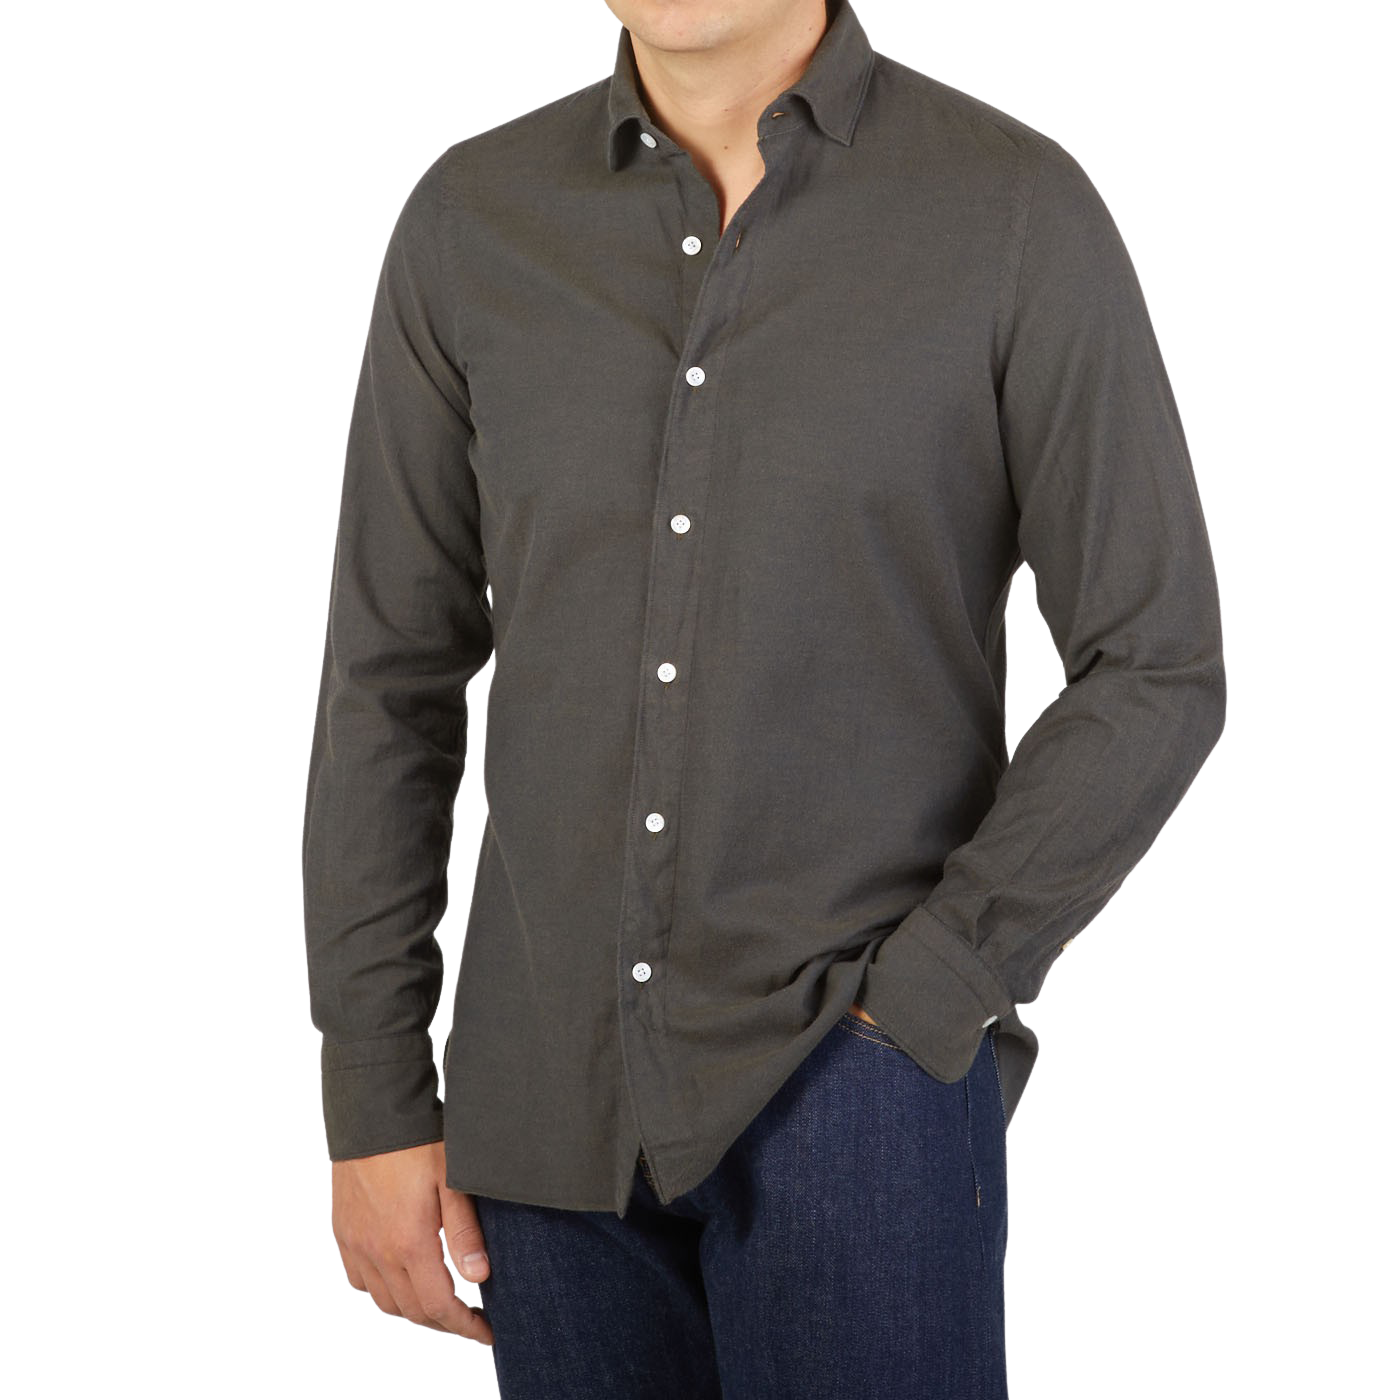 Finamore Dark Green Cotton Flannel Casual Shirt Front